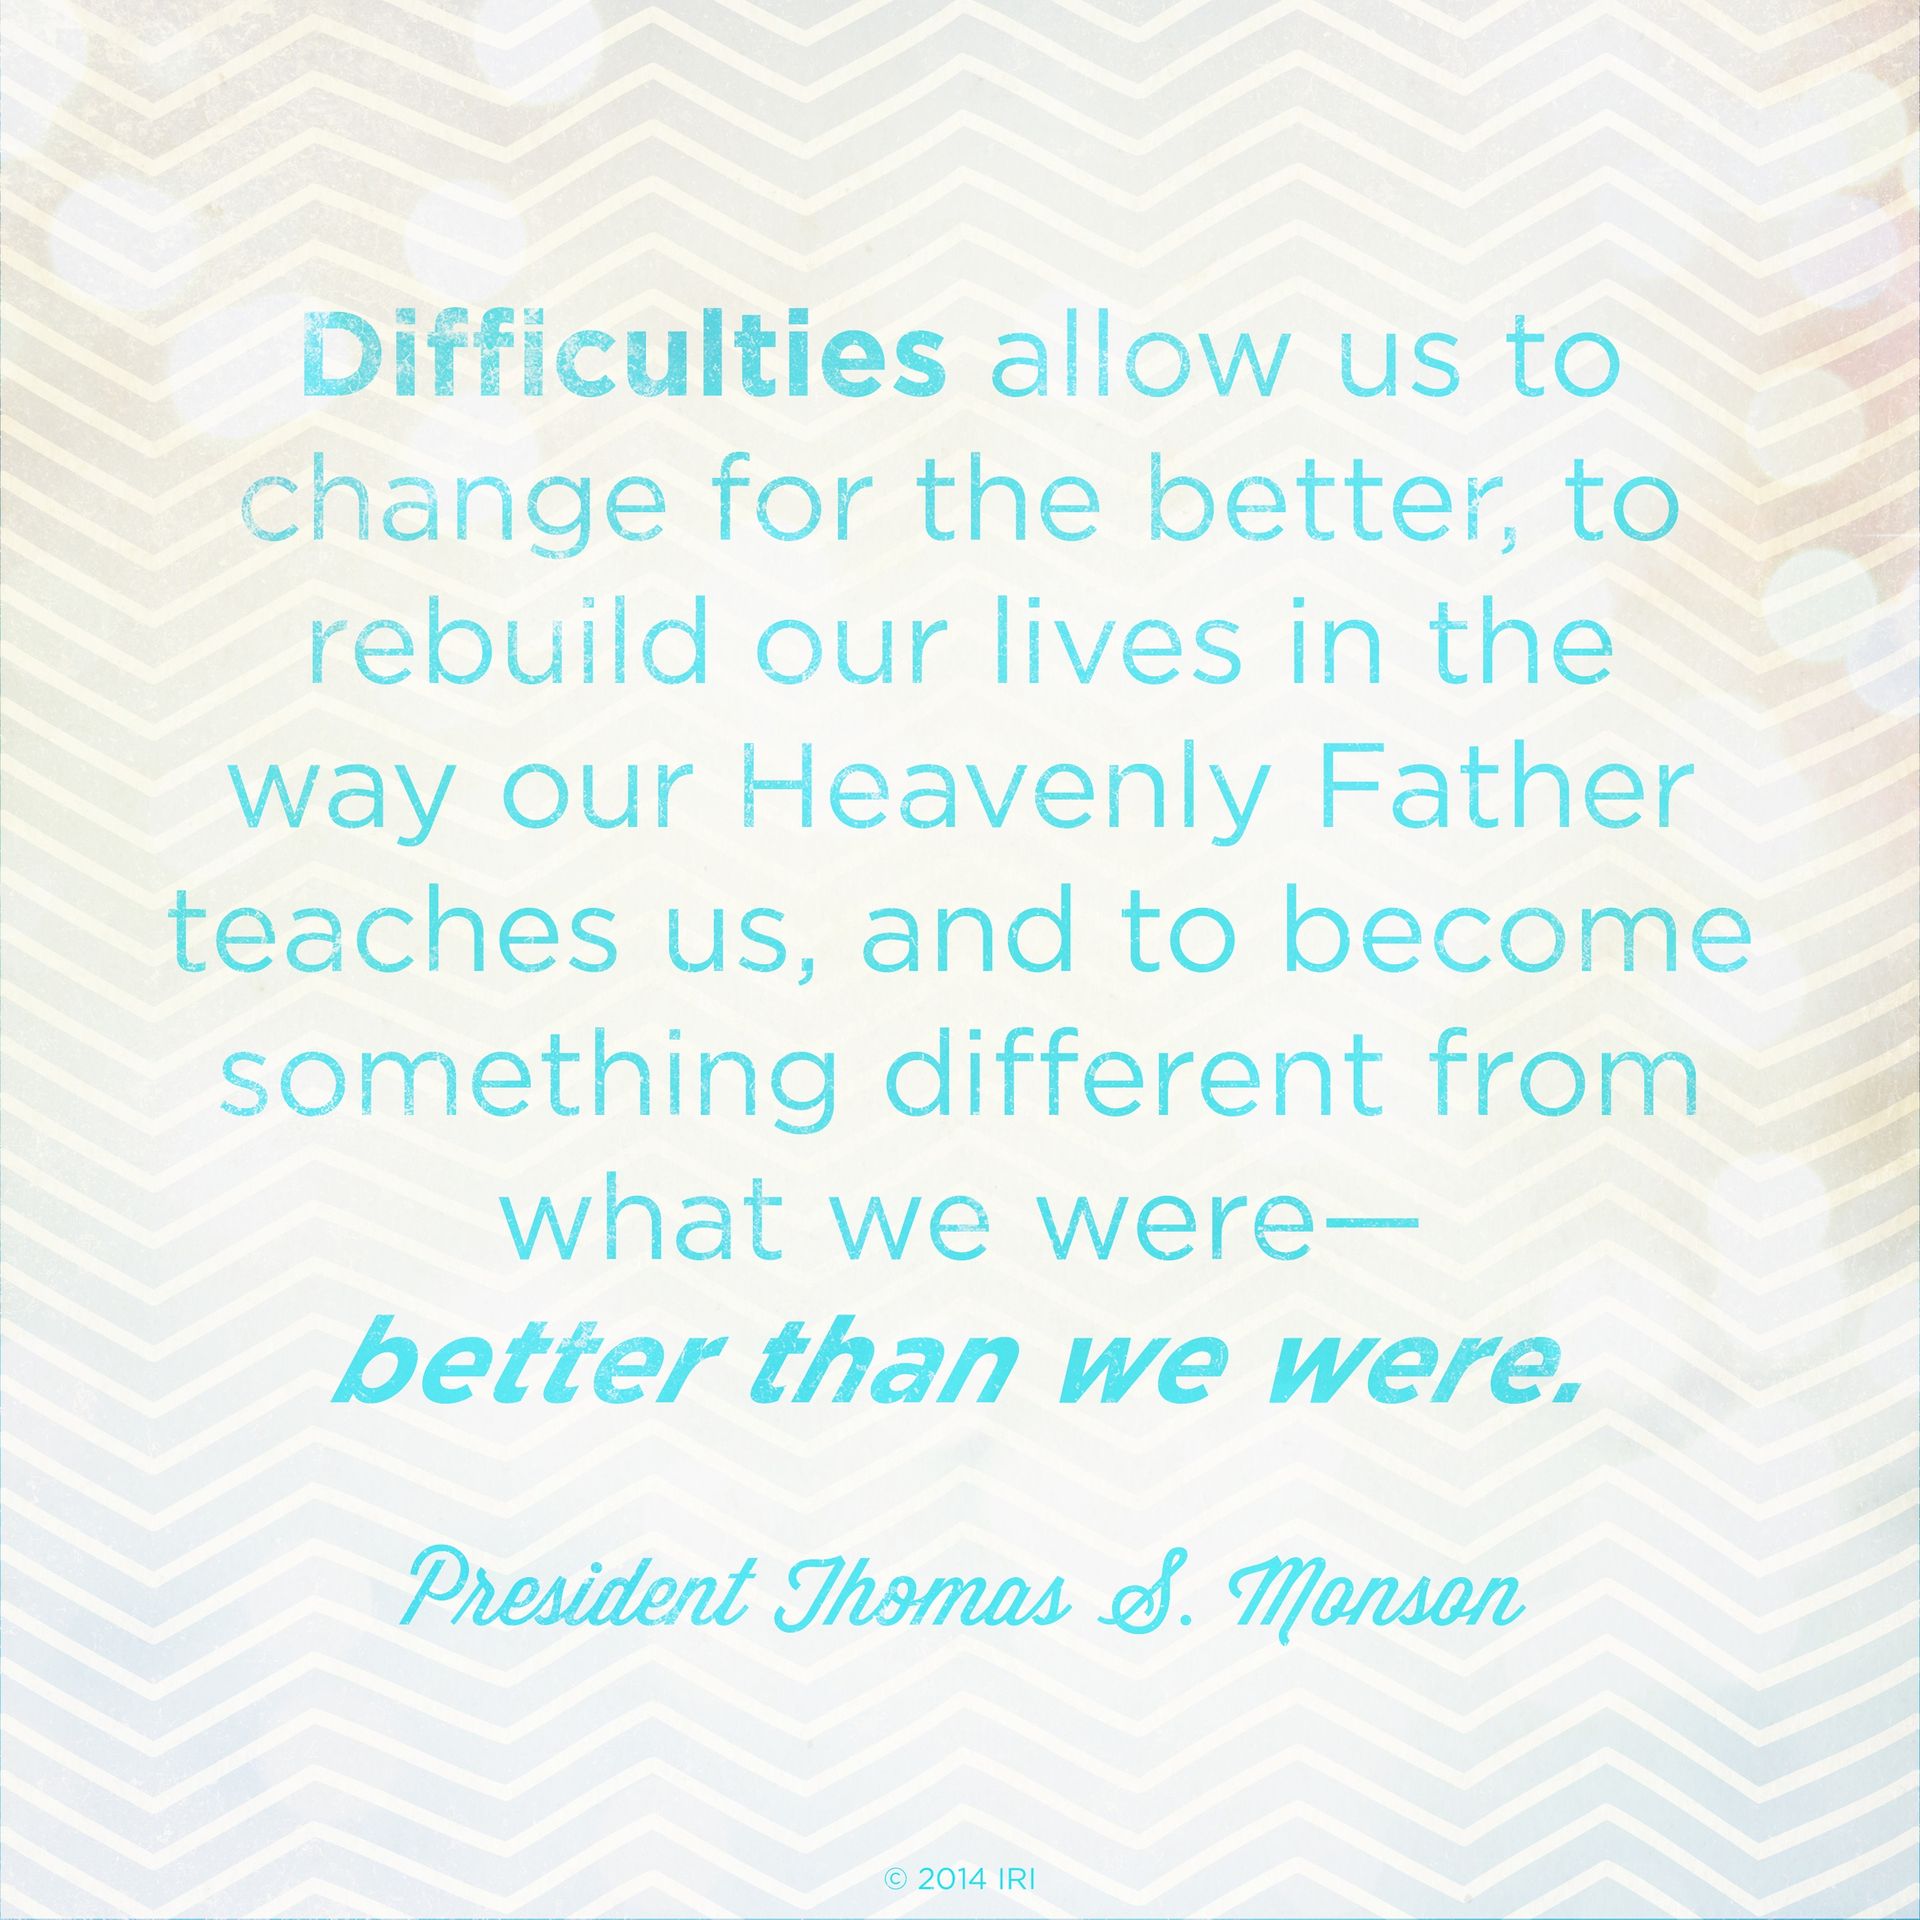 “Difficulties allow us to change for the better, to rebuild our lives in the way our Heavenly Father teaches us, and to become something different from what we were—better than we were.”—President Thomas S. Monson, “I Will Not Fail Thee, nor Forsake Thee”  